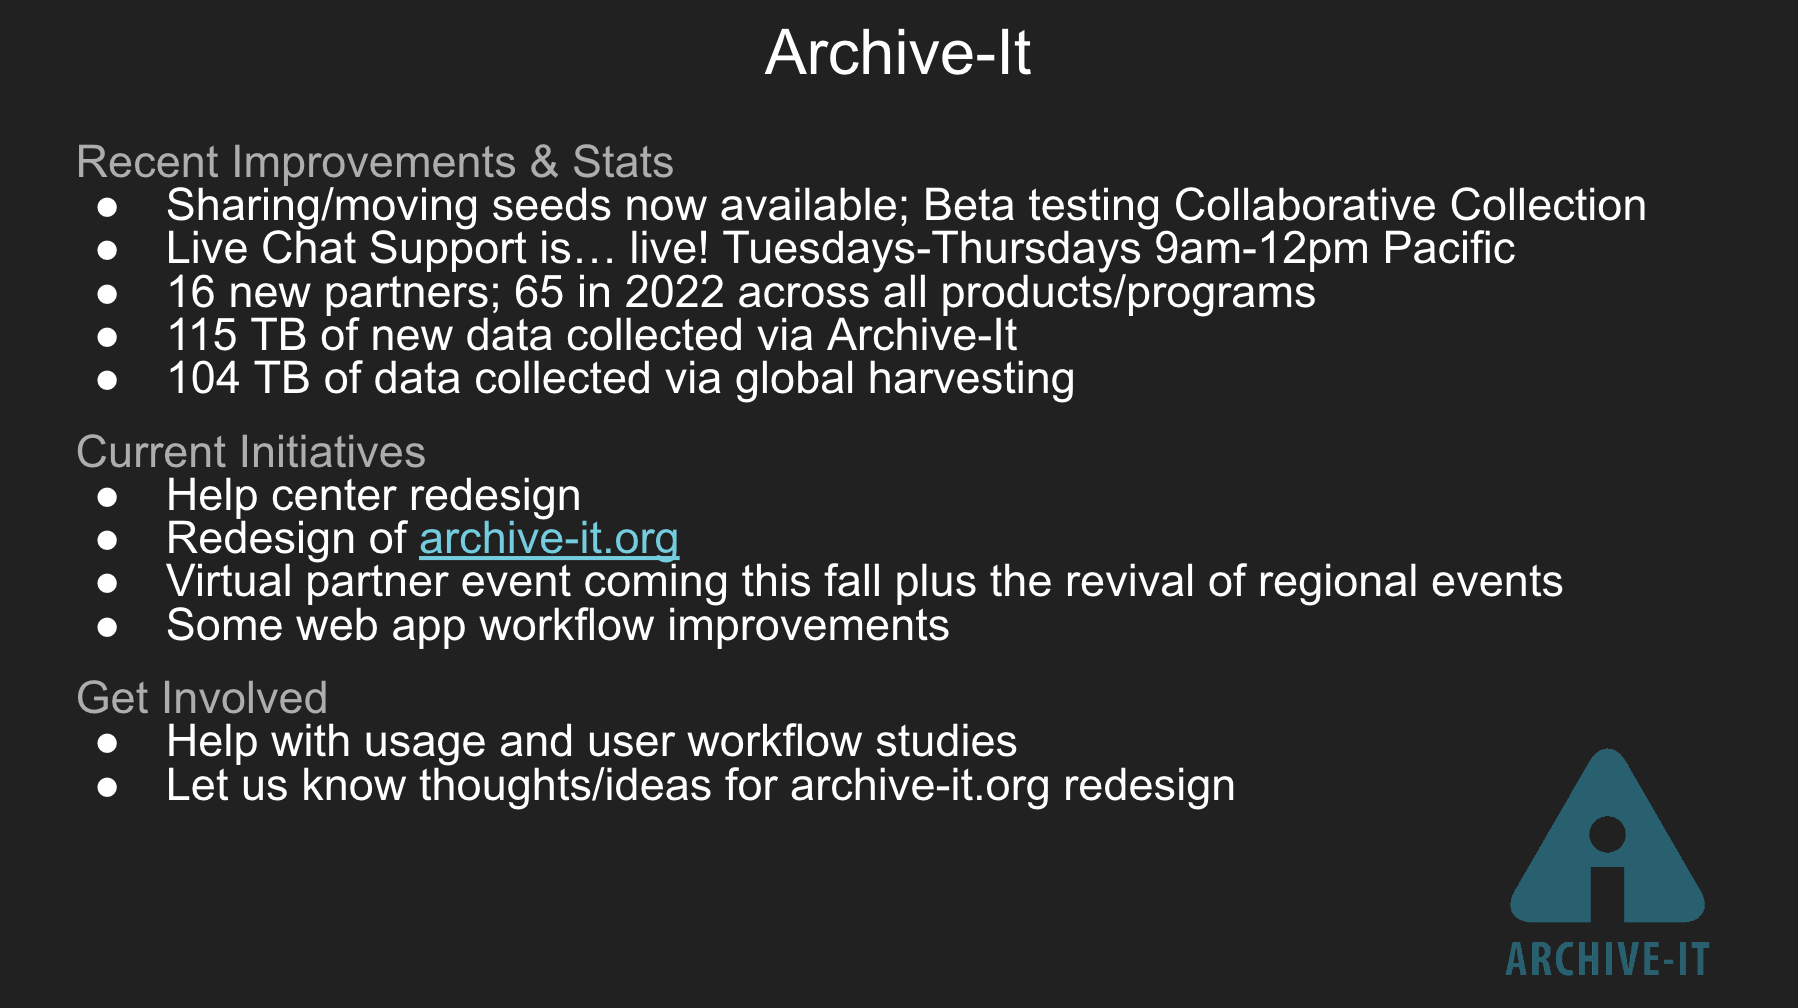 Screenshot of a slide about Archive-It from Jefferson Bailey’s presentation about Internet Archive service and community developments